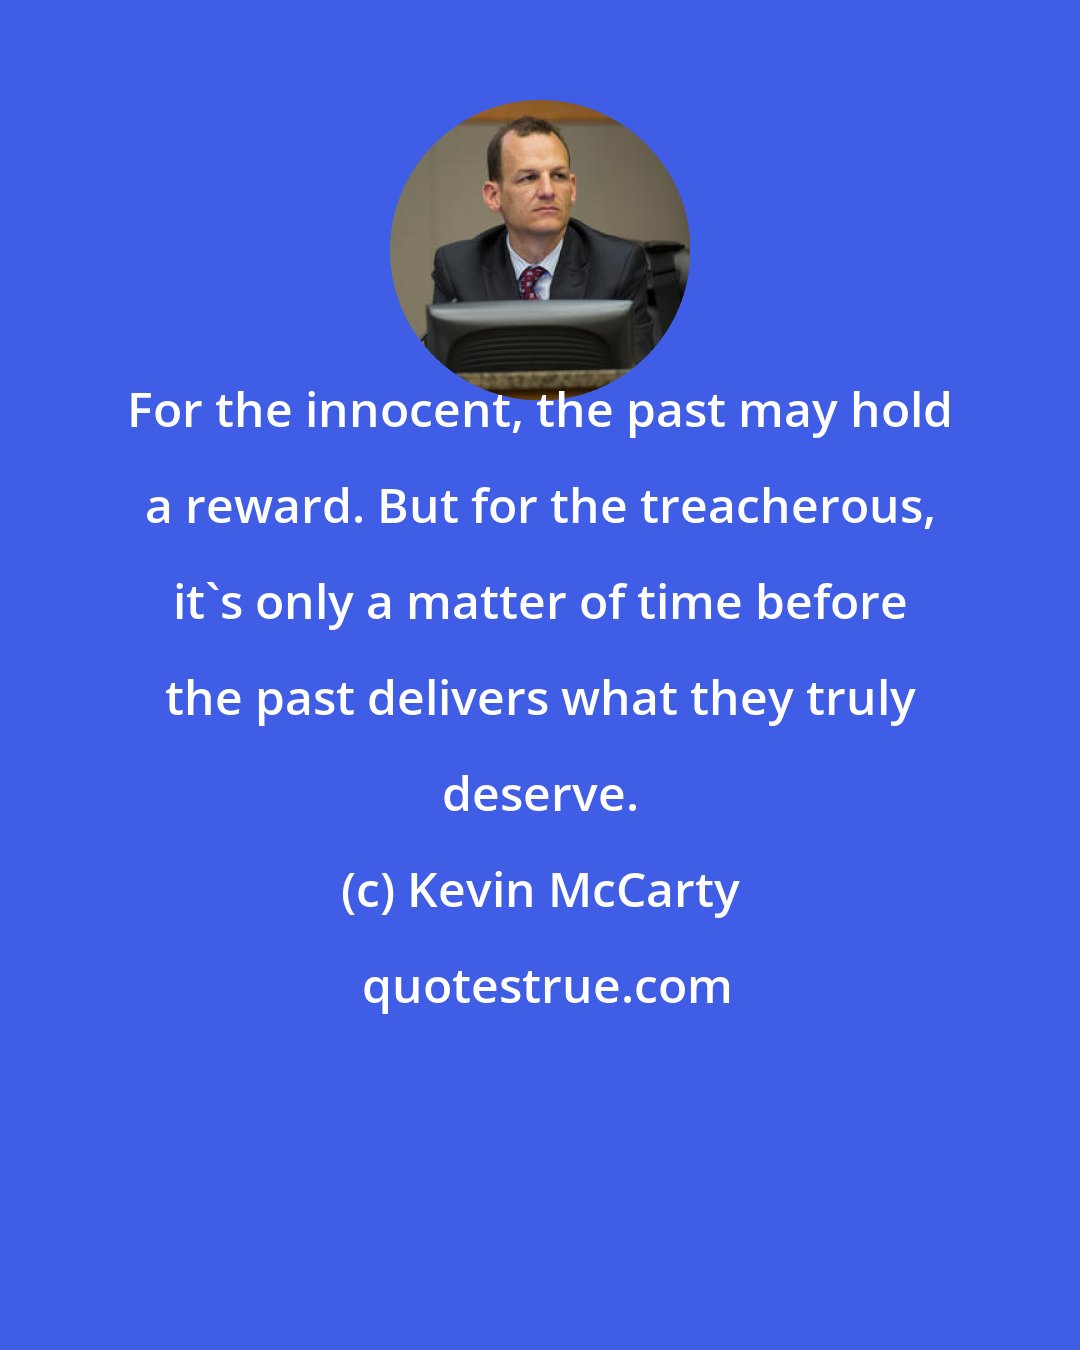 Kevin McCarty: For the innocent, the past may hold a reward. But for the treacherous, it's only a matter of time before the past delivers what they truly deserve.